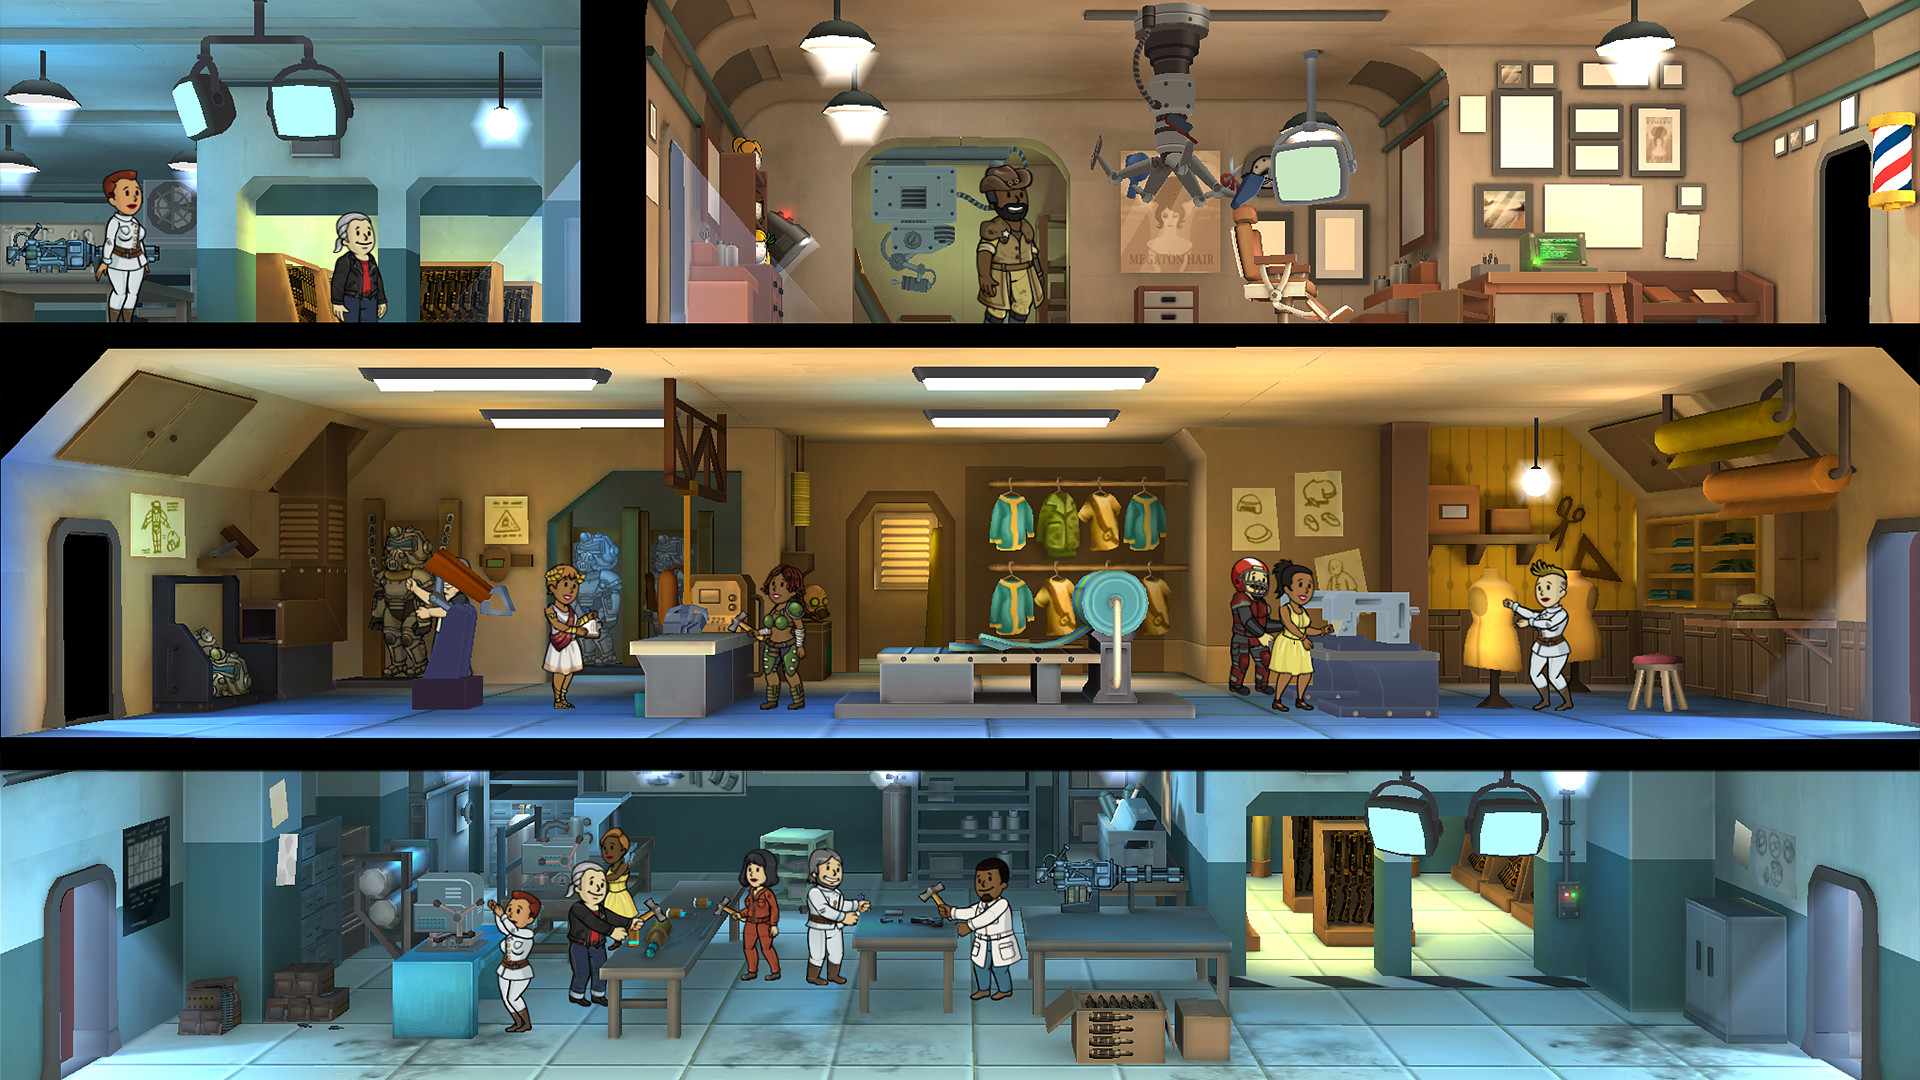 Fallout Shelter [PC SWITCH PS4 XONE iOS ANDROID] Ss_f1251e5d797779788ca37a325f688a48a1d4492f.1920x1080